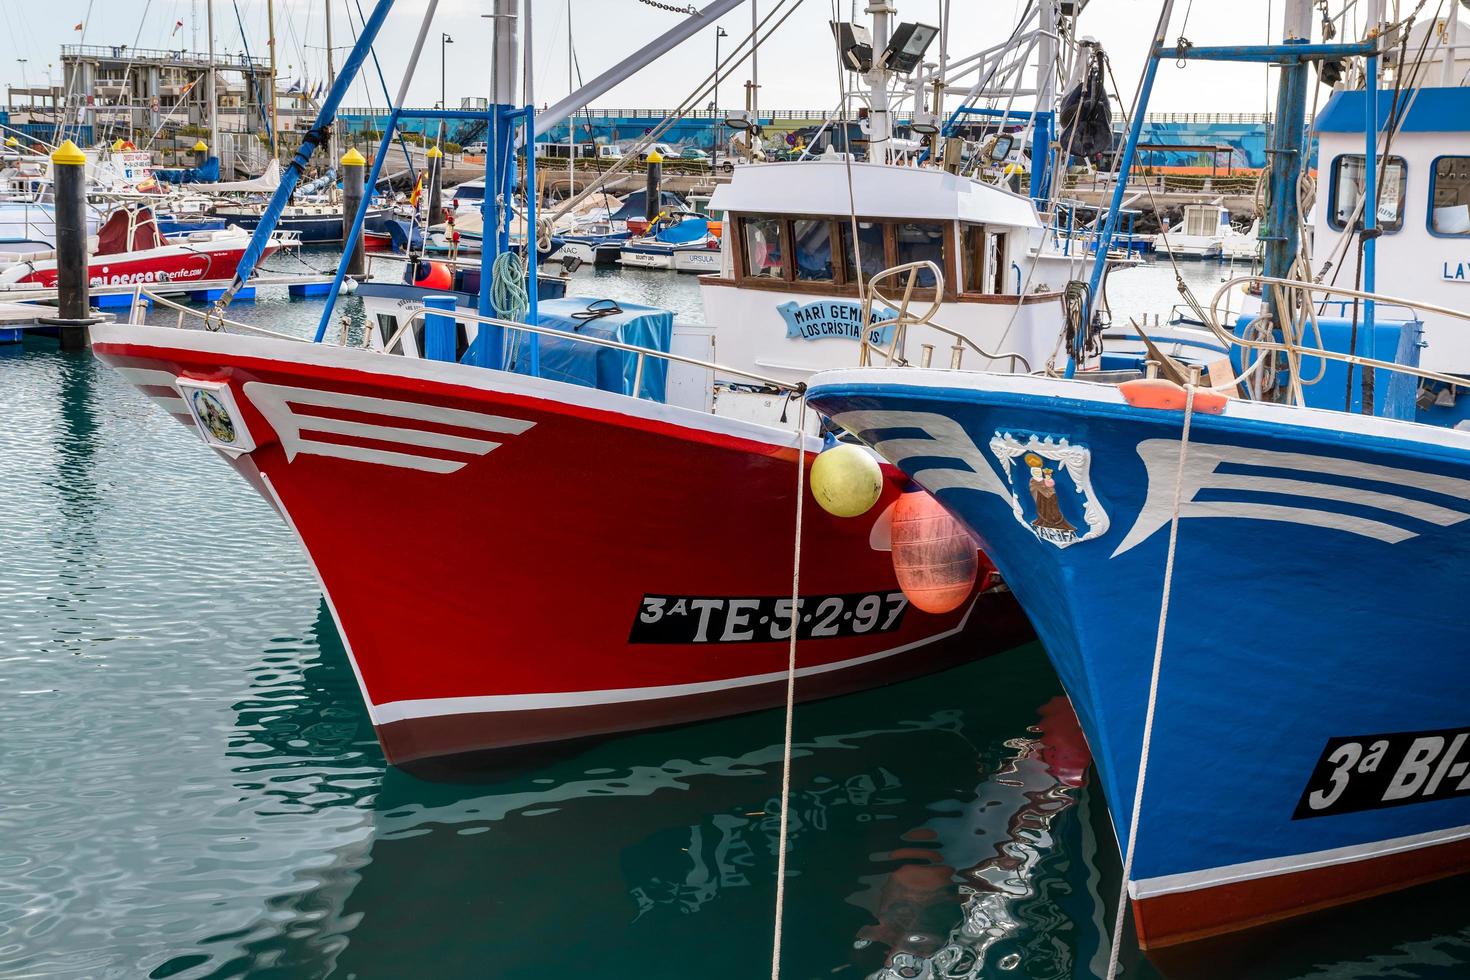 Los Christianos, Tenerife , Spain, 2015. Fishing boats moored in the harbour photo